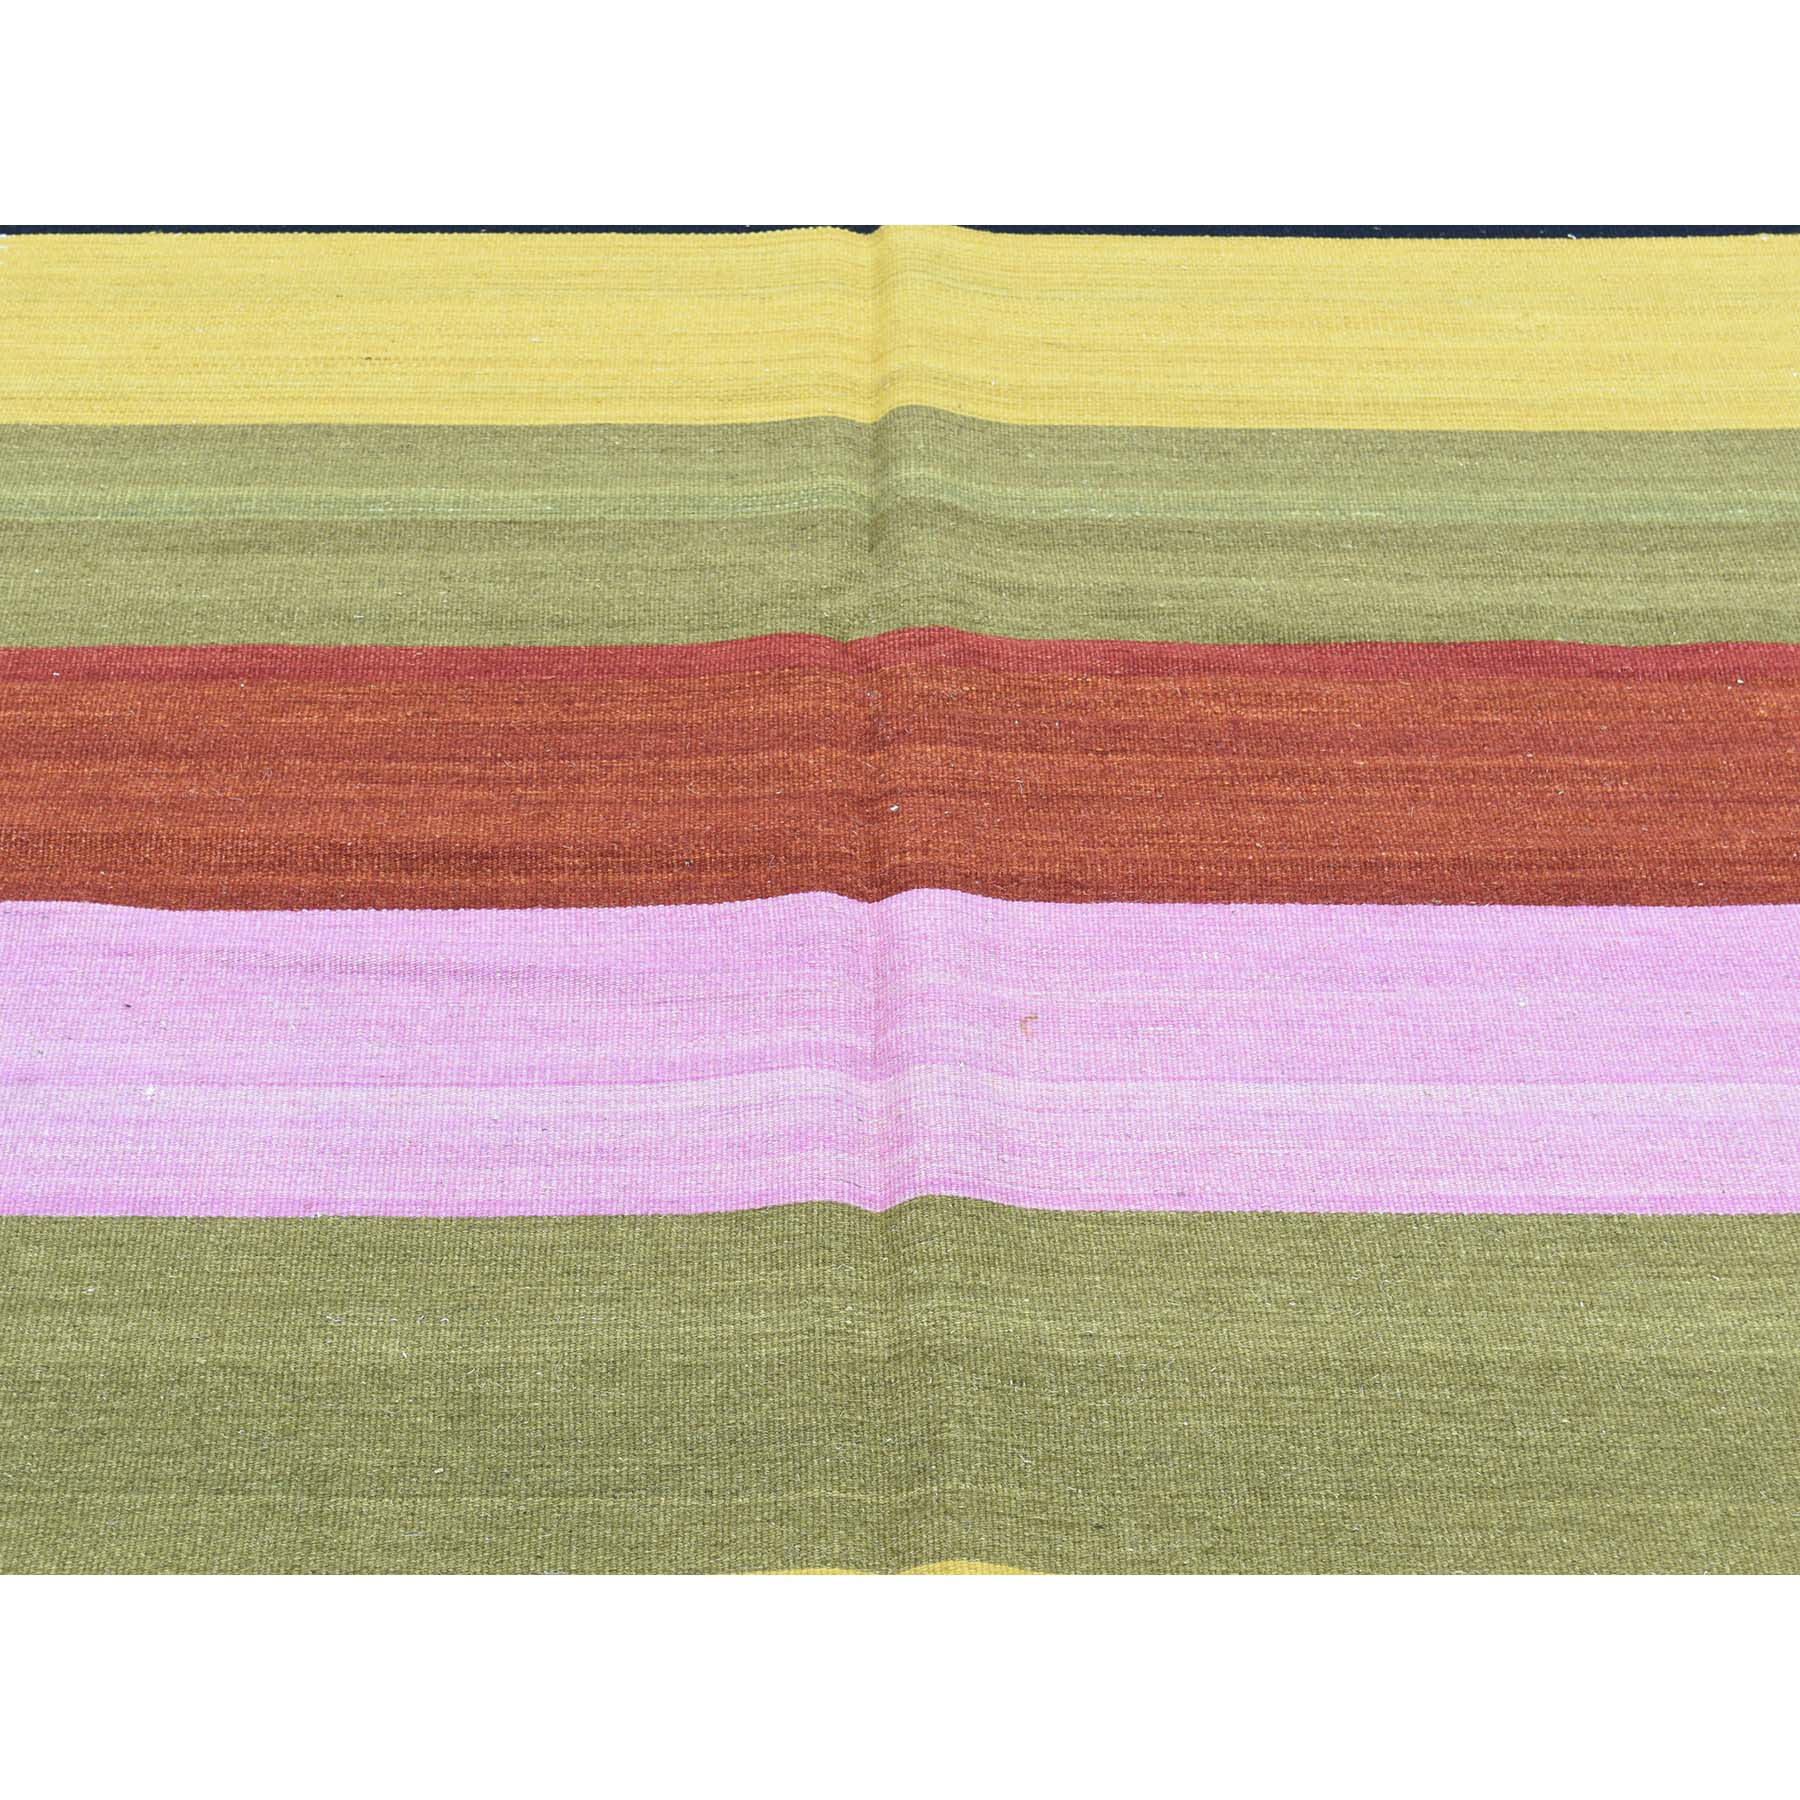 10-x14-6  Hand-Woven Flat Weave Multicolored Durie Kilim Oriental Rug 